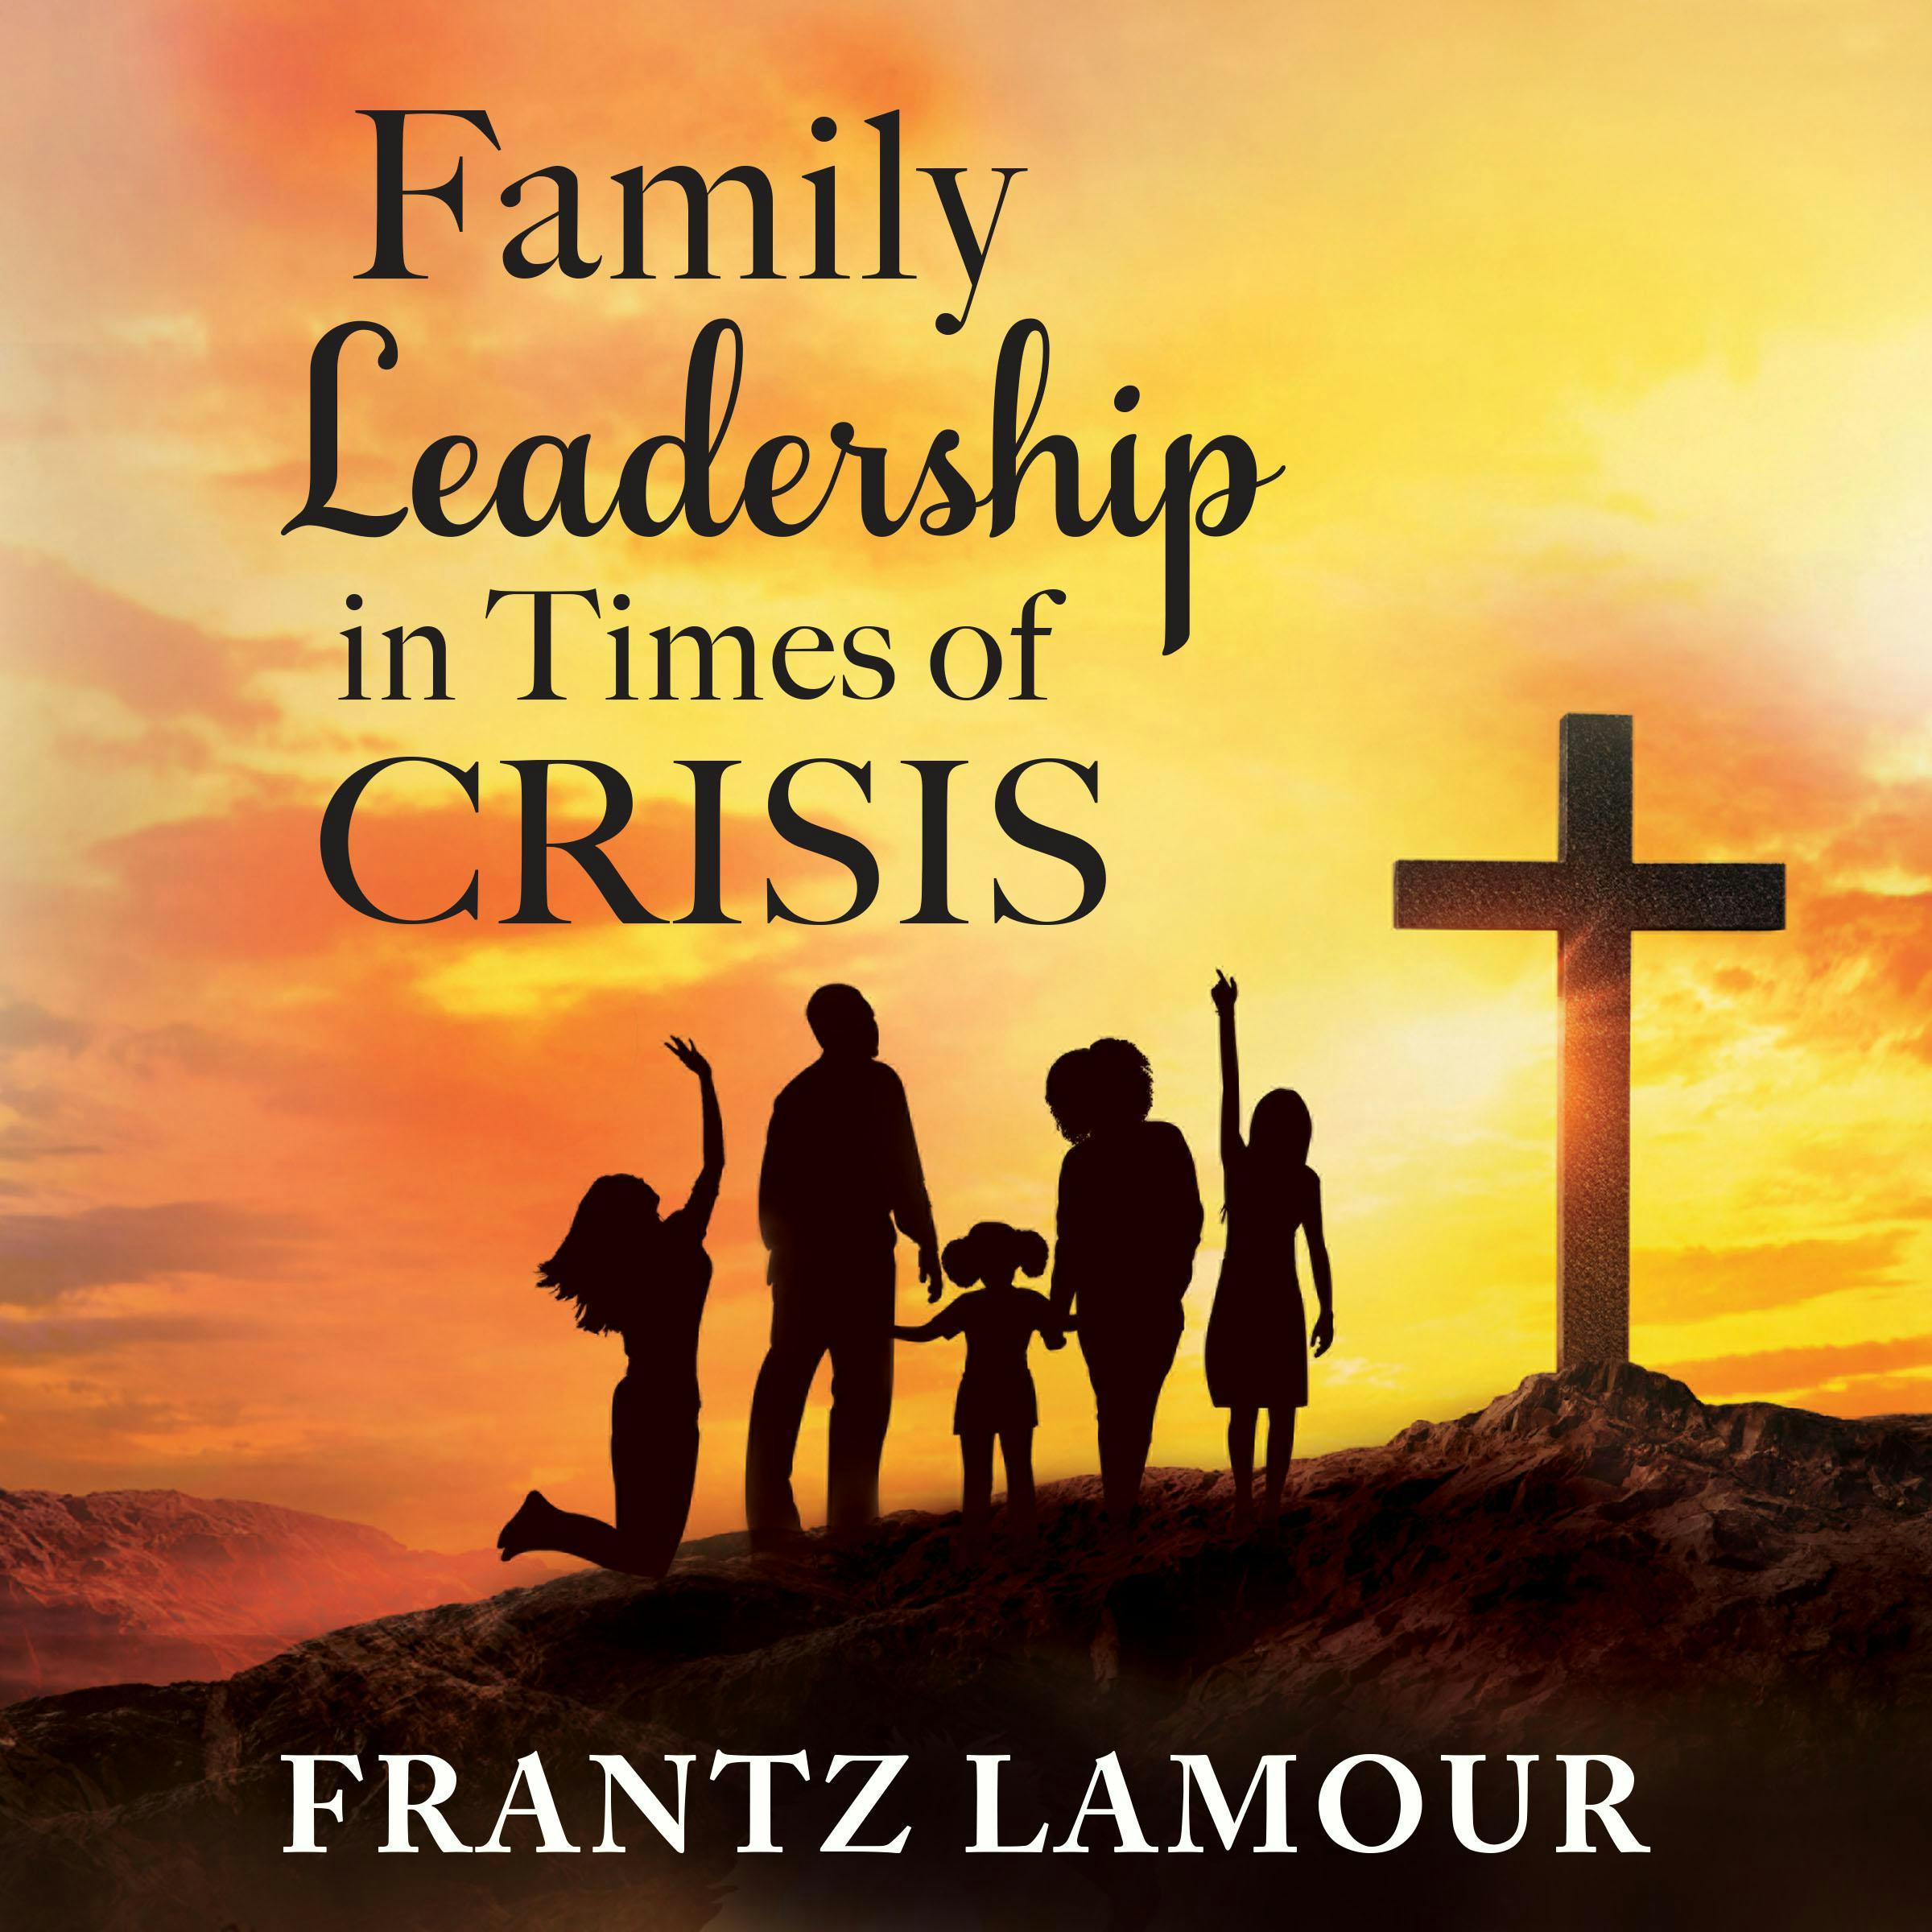 Family Leadership in Times of Crisis - undefined